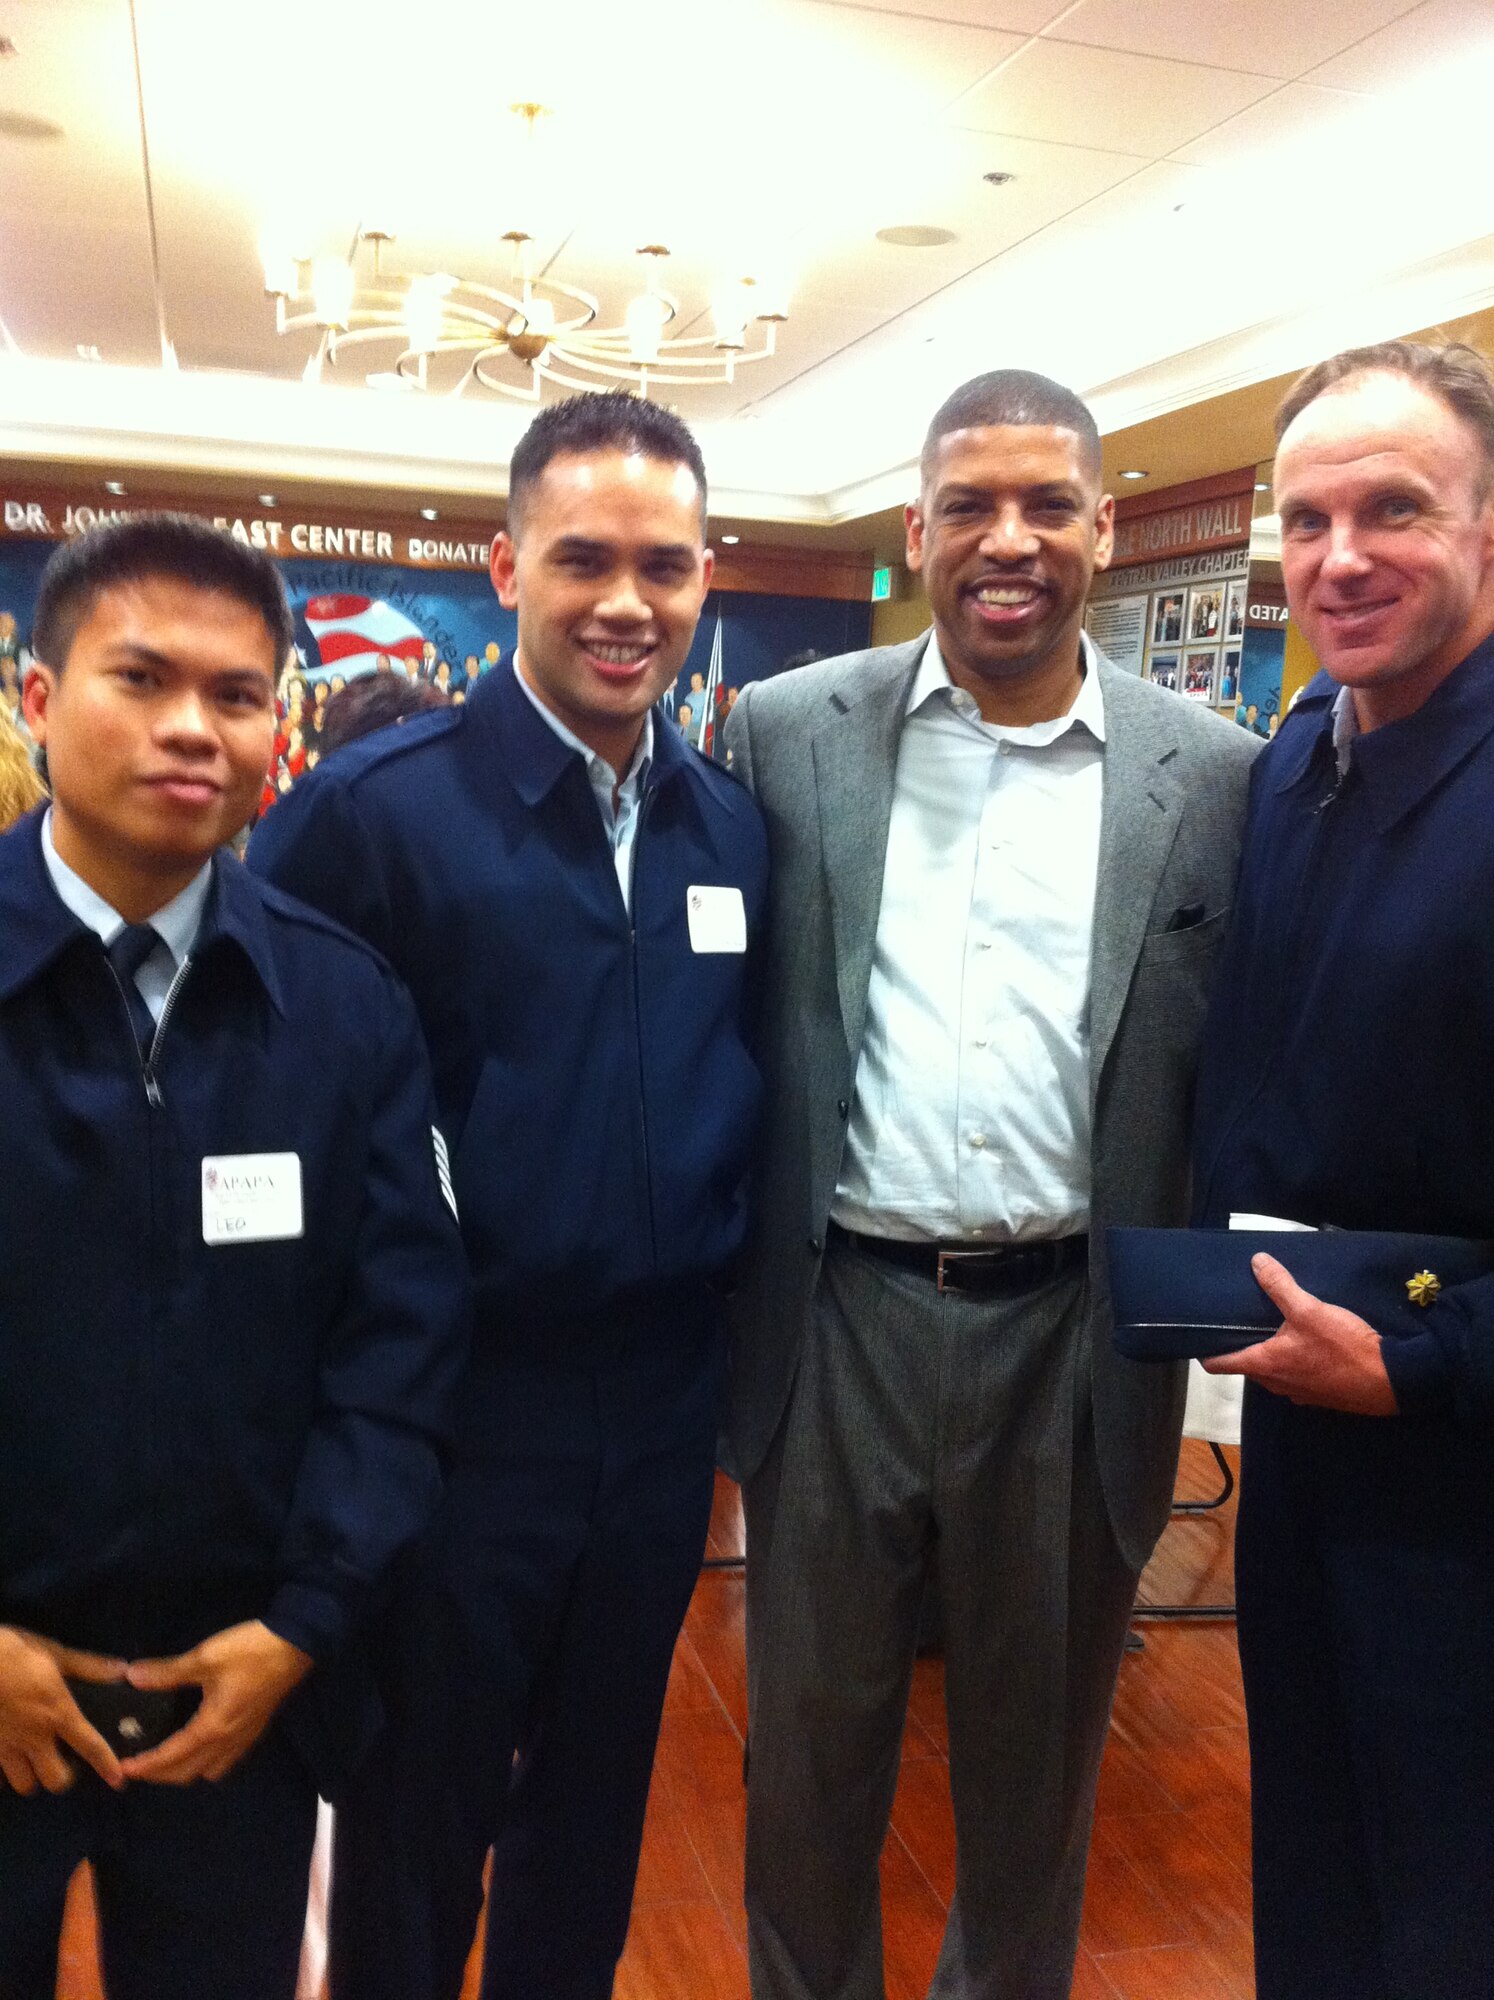 (l-r) Tech. Sgt. Leo Morales, Staff Sgt. Christian Manuel, Sacramento Mayor Kevin Johnson, Major Kevin Magaletta

SACARAMENTO, Calif. – Major Kevin Magaletta, 364th Recruiting Squadron operations flight commander, presented information on Air Force career opportunities to a group of 200 senior Sacramento influencers at an Asian-Pacific Islander American Public Affairs Association holiday mixer here December 12.  Sacramento Mayor and former NBA player Kevin Johnson was in attendance and posed for photos with members of the 364th RCS. 
